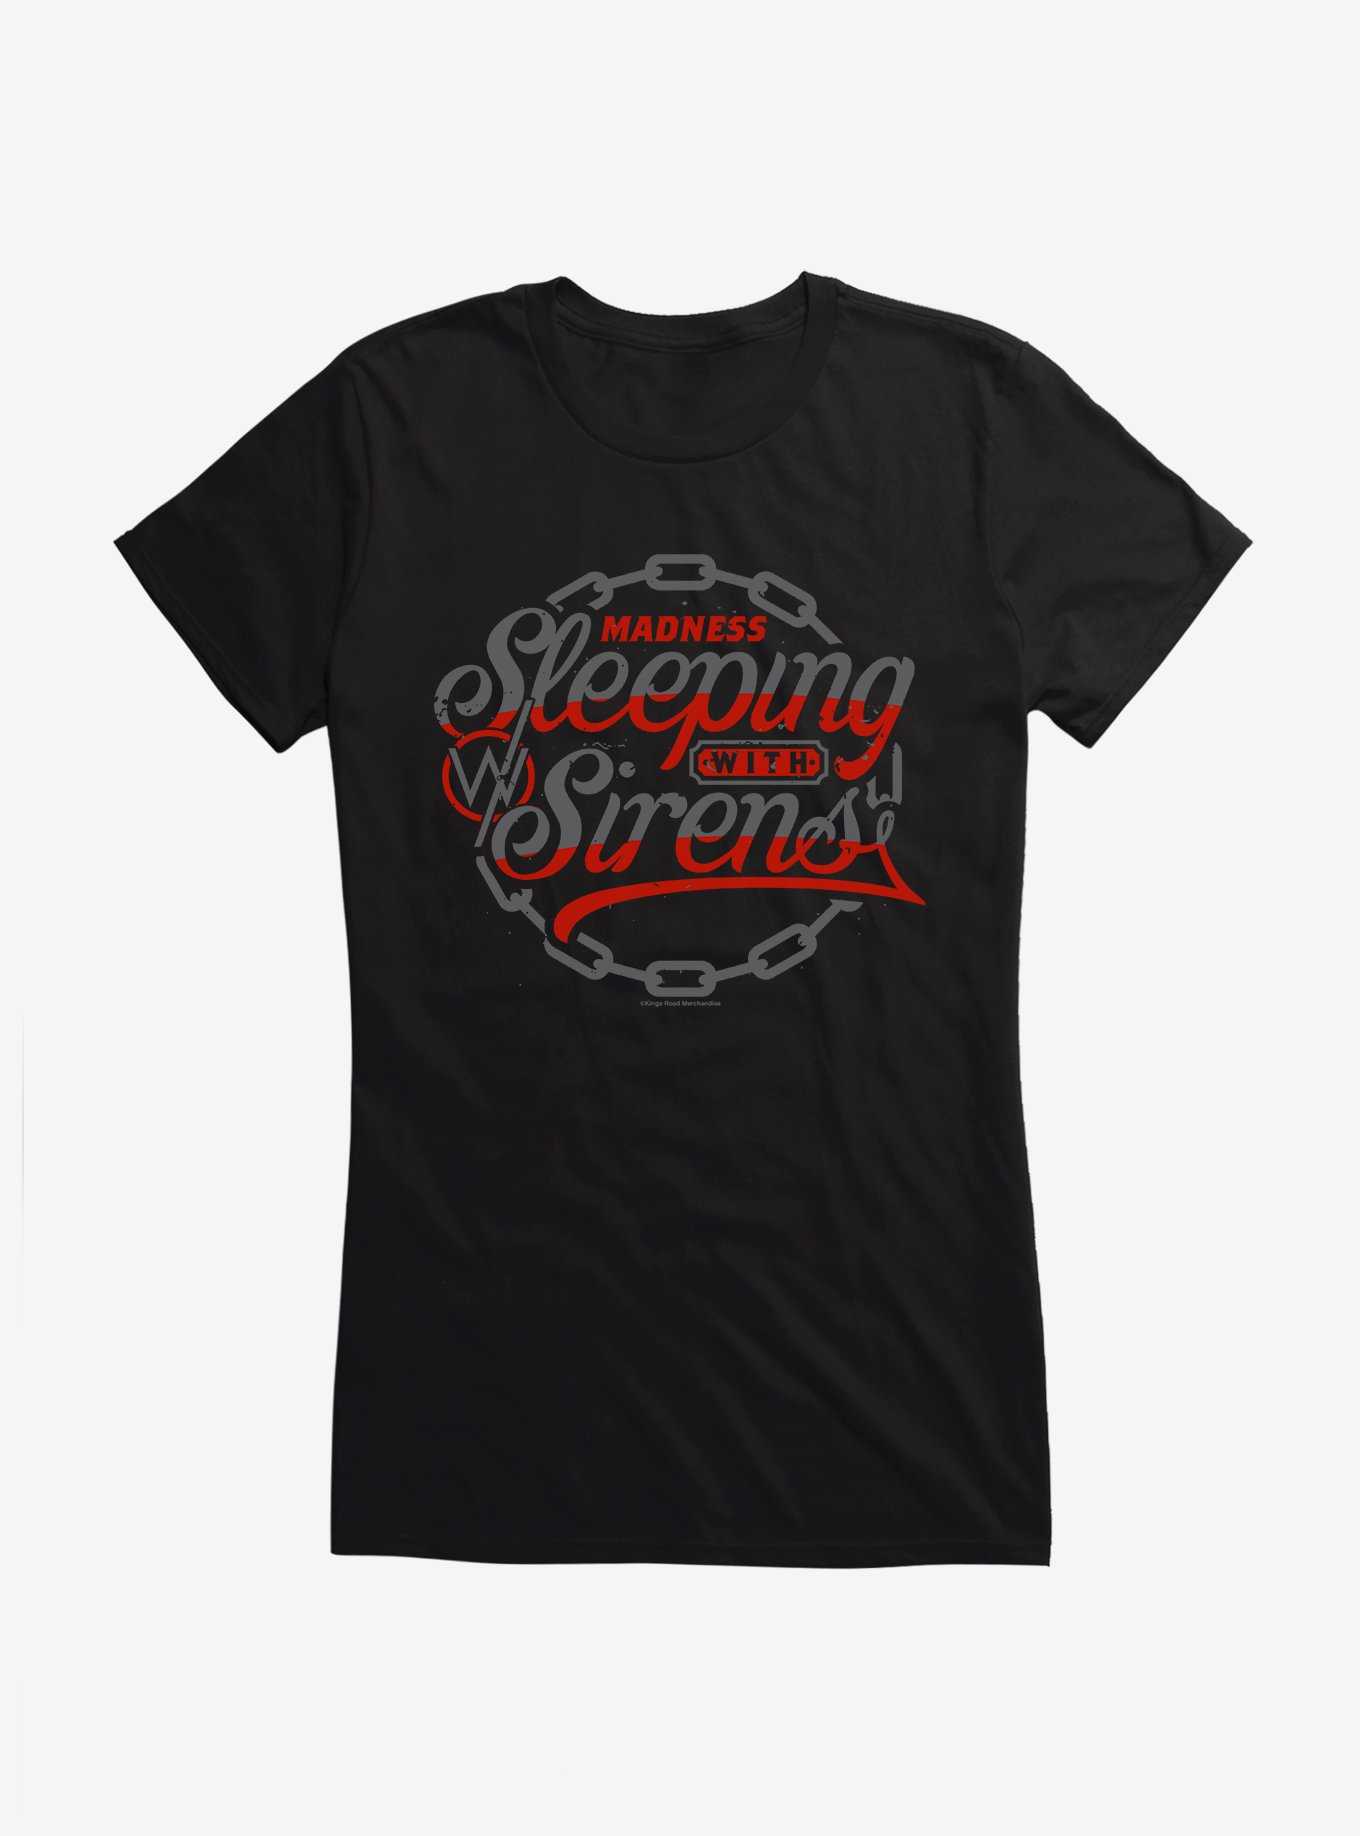 Sleeping With Sirens Chain Crest Girls T-Shirt, , hi-res